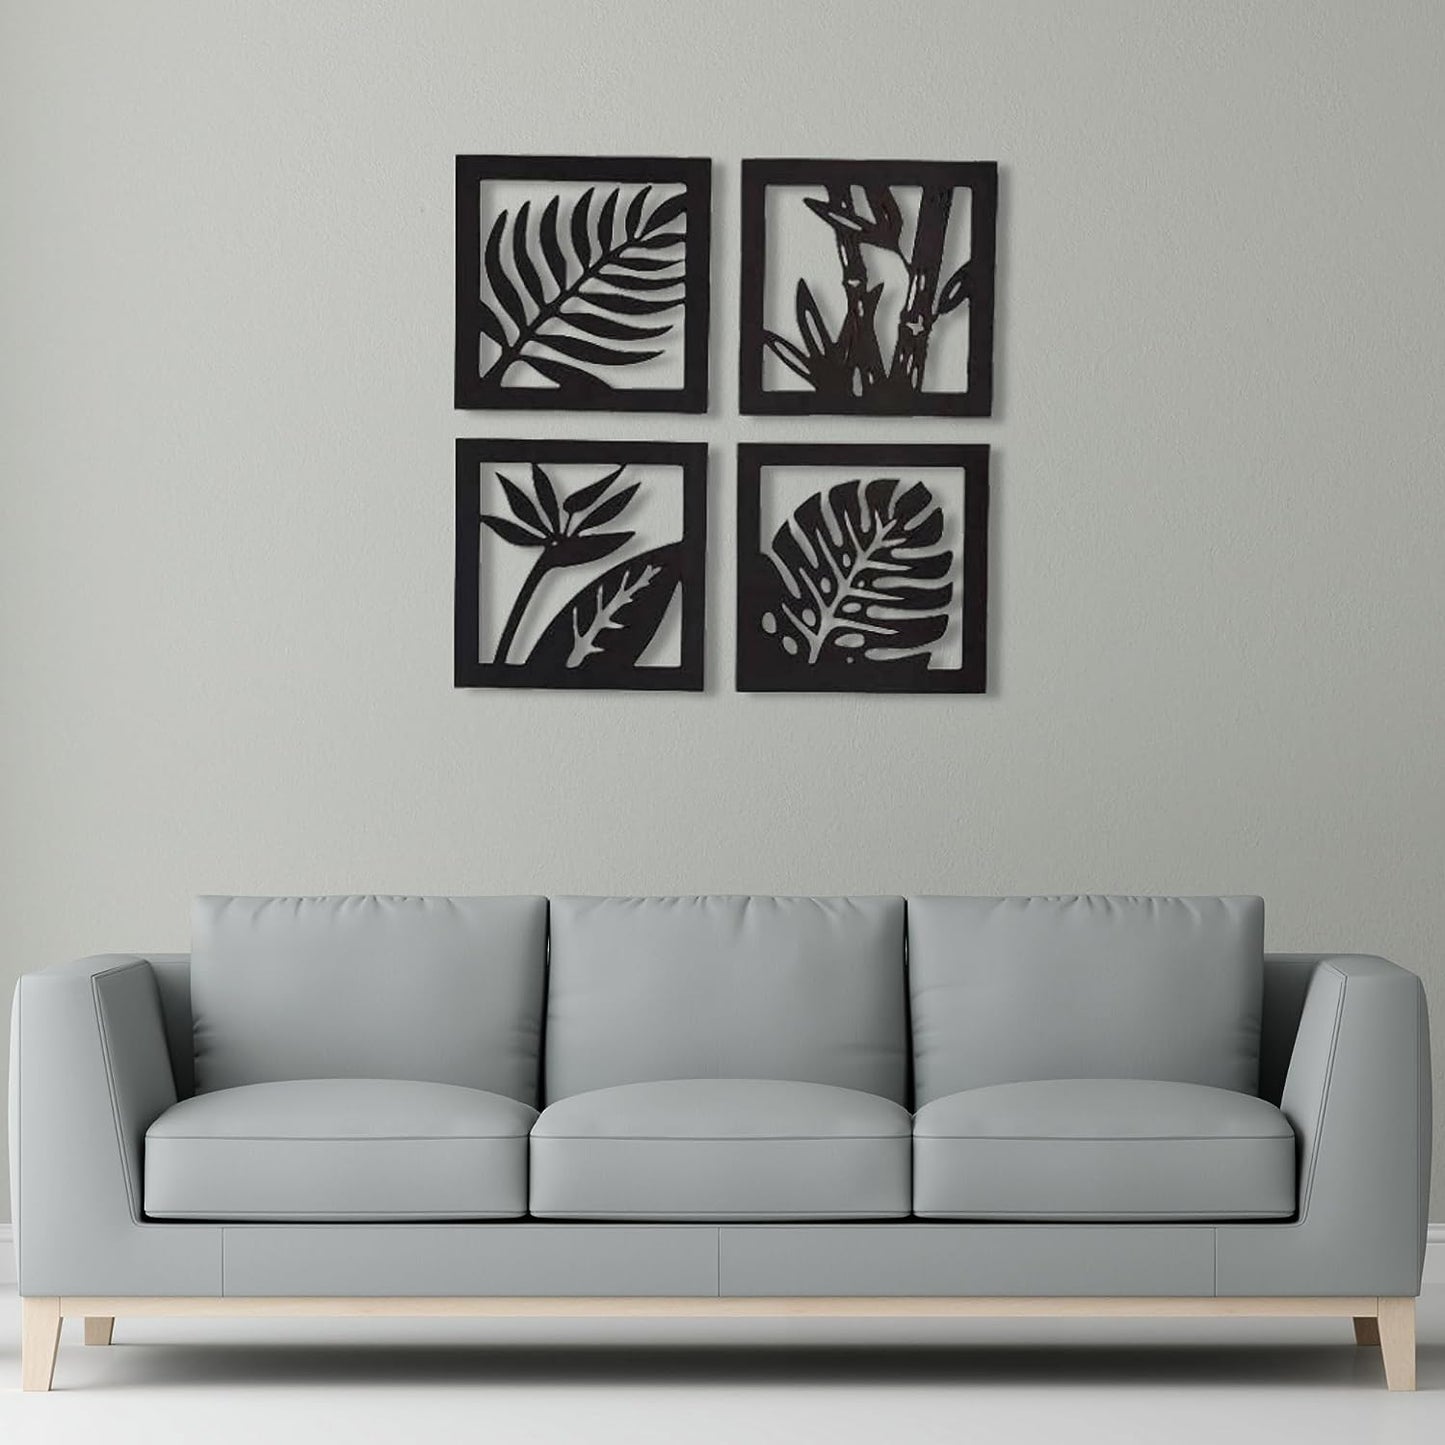 Wooden 4 Pieces Square Tree Leaf Wall Art Panel Frame